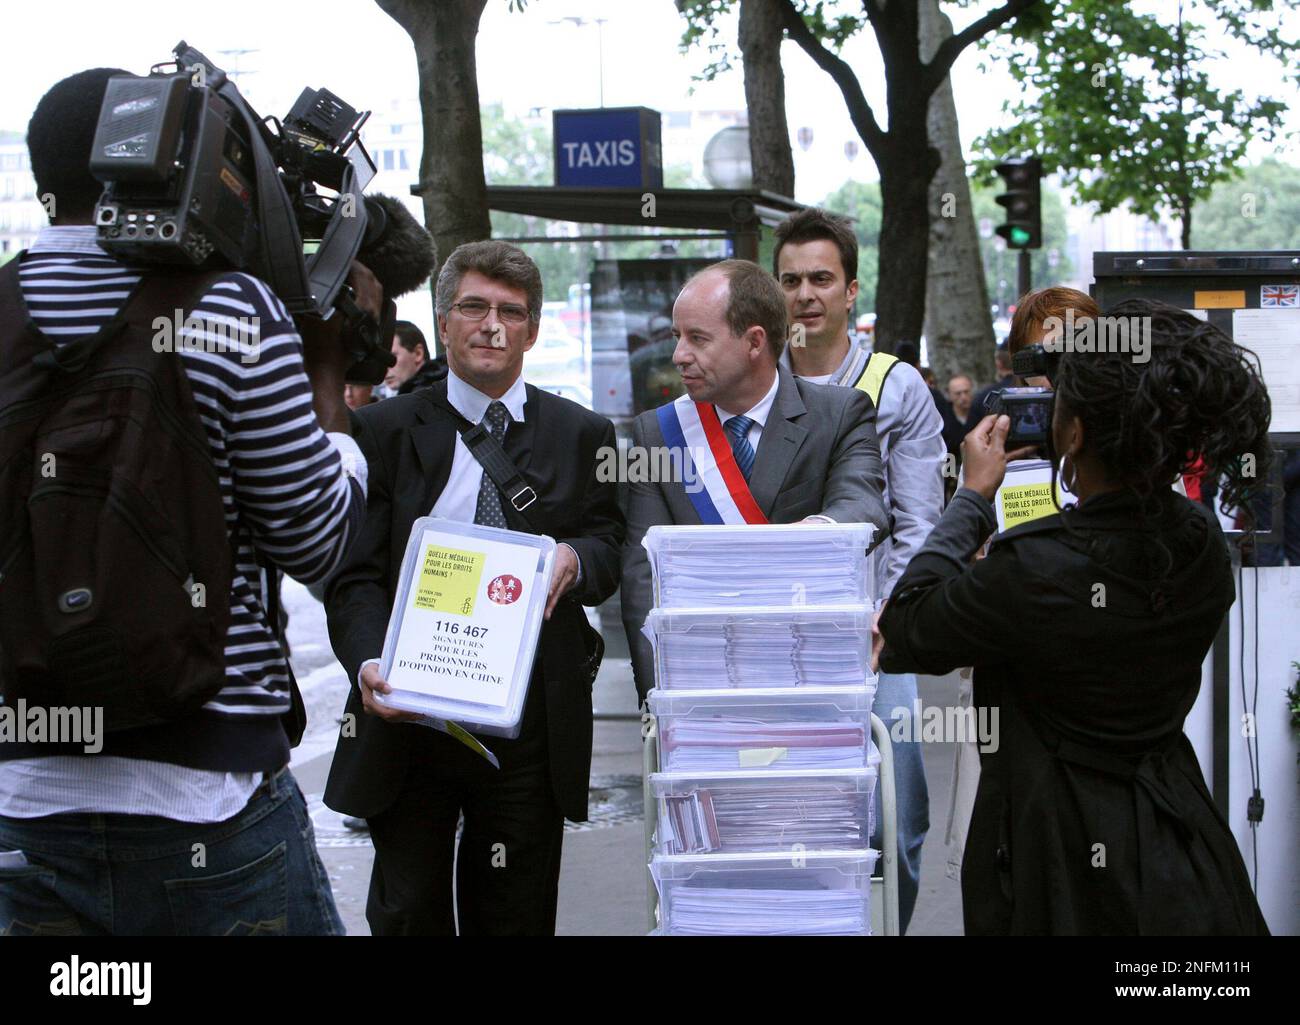 Stephan Oberreit, Director of Amnesty International in France, center left,  and Jean Jaques Urvoas, a French member of parliament, center right, carry  boxes containing 116,467 signatures demanding the release of dissident  prisoners